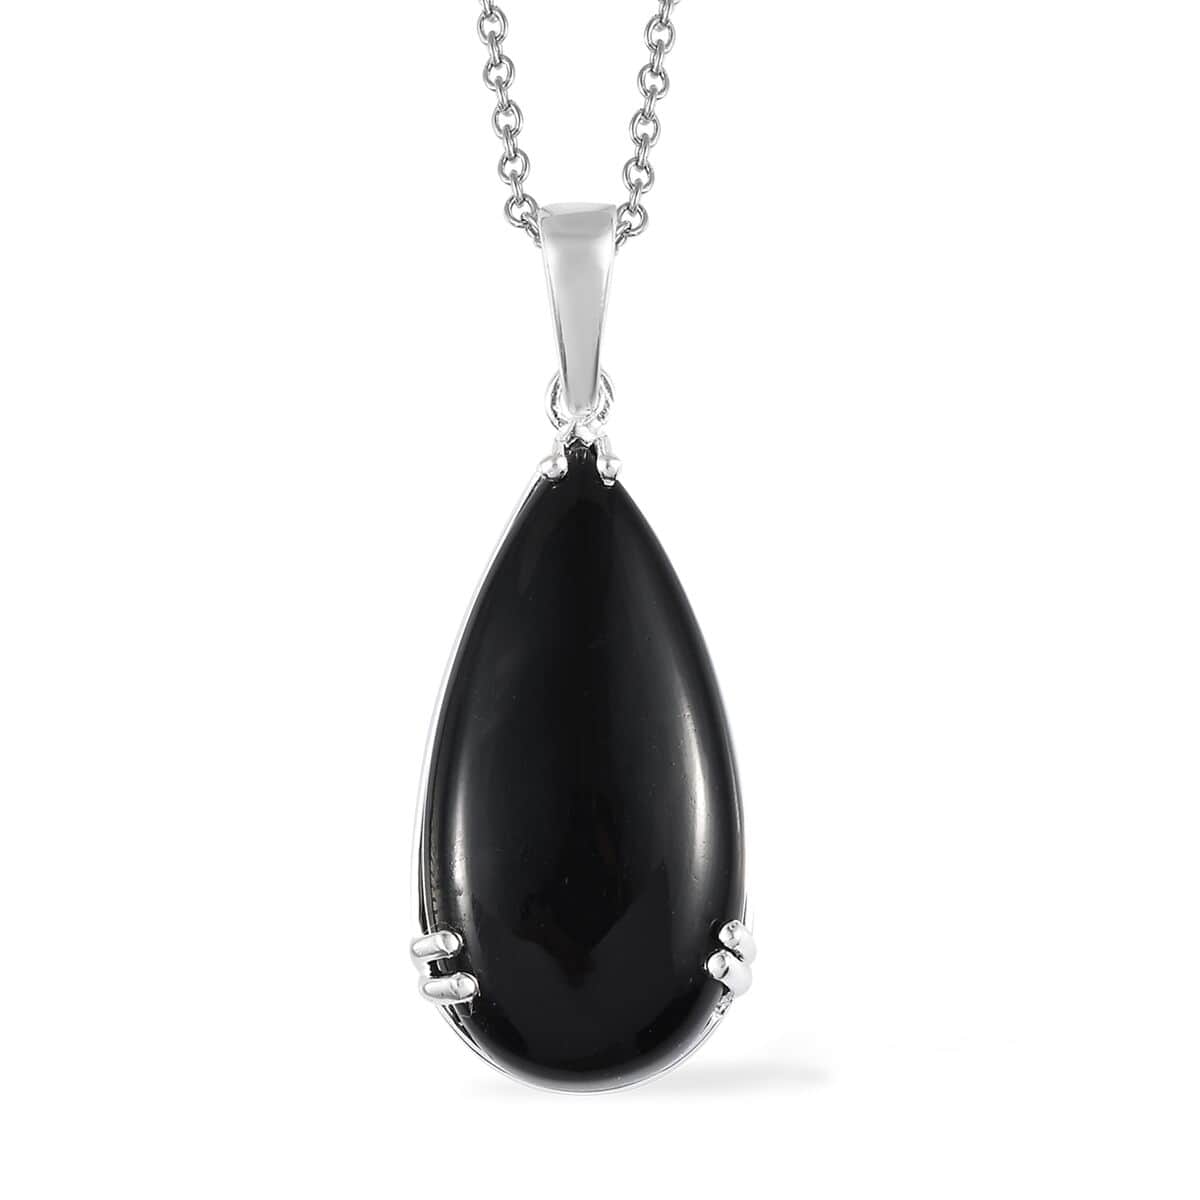 Black Onyx Pendant Necklace 20 Inches in Sterling Silver, Black Teardrop Pendant Necklaces for Women, Silver Boho Pendant - December Birthstone Necklace with Stainless Steel Chain 20 Inches 20.00 ctw image number 0